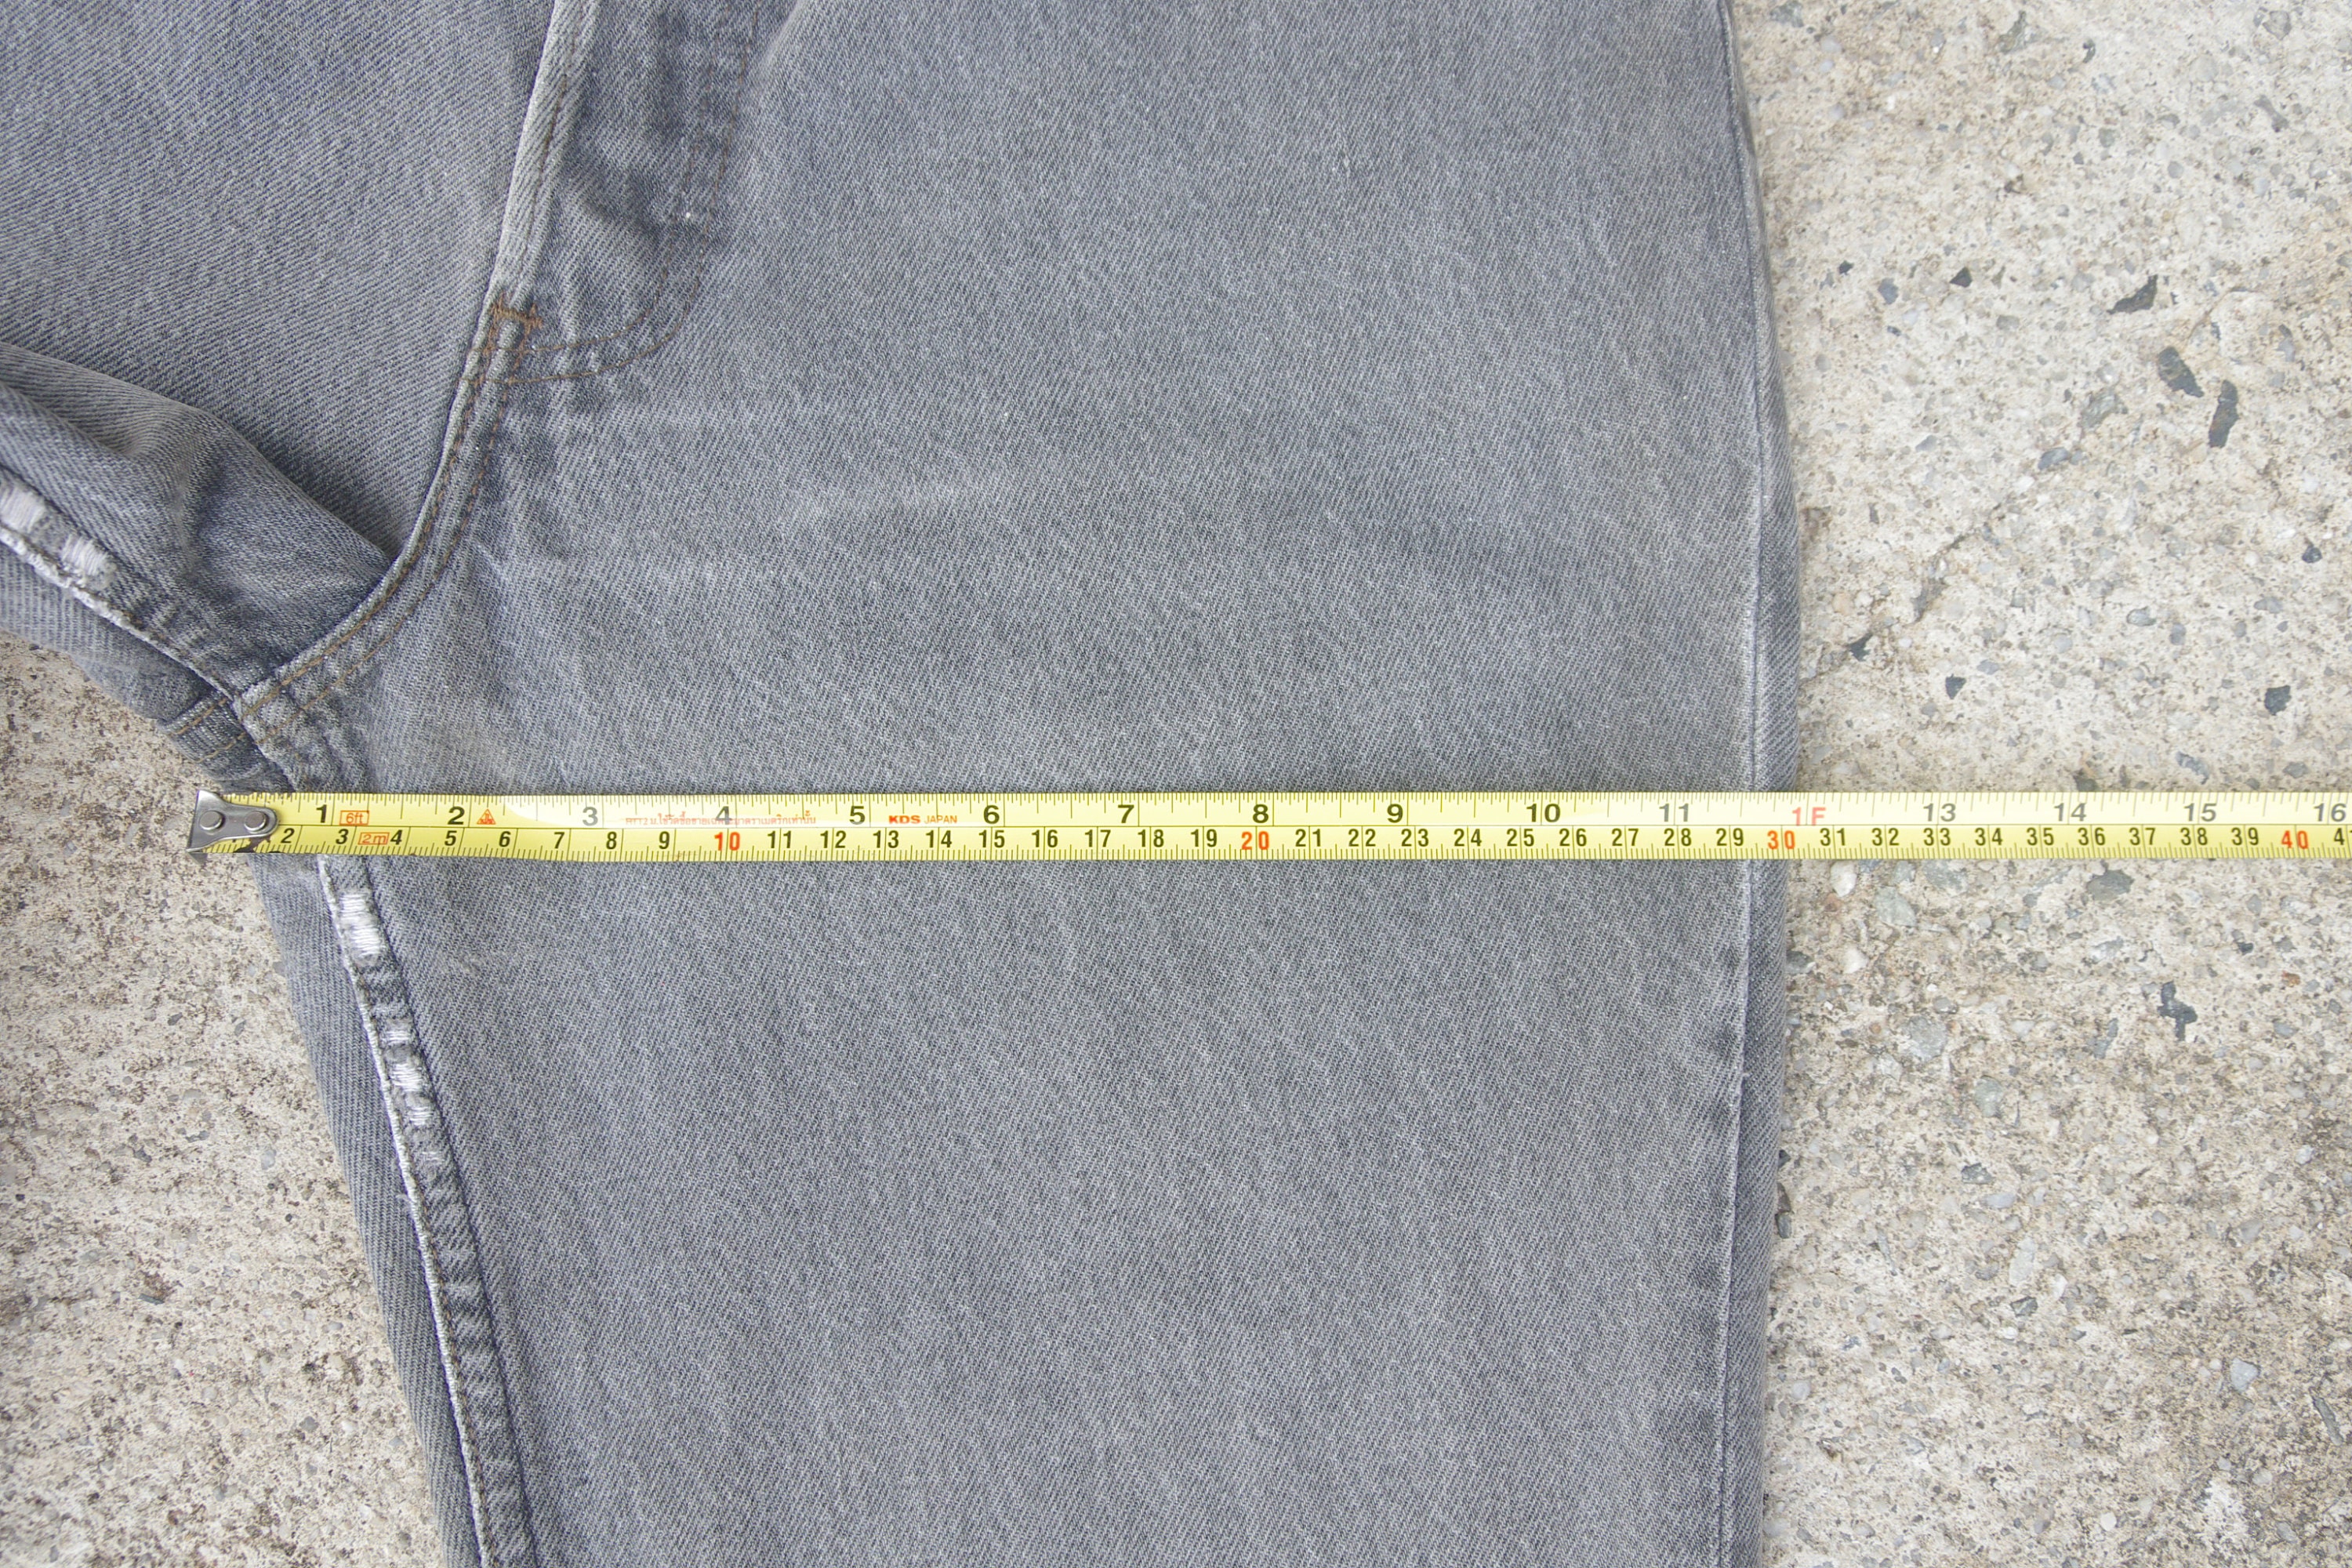 Faded Jeansvintage Levis 501 Black Jeans W28 L29levis for - Etsy